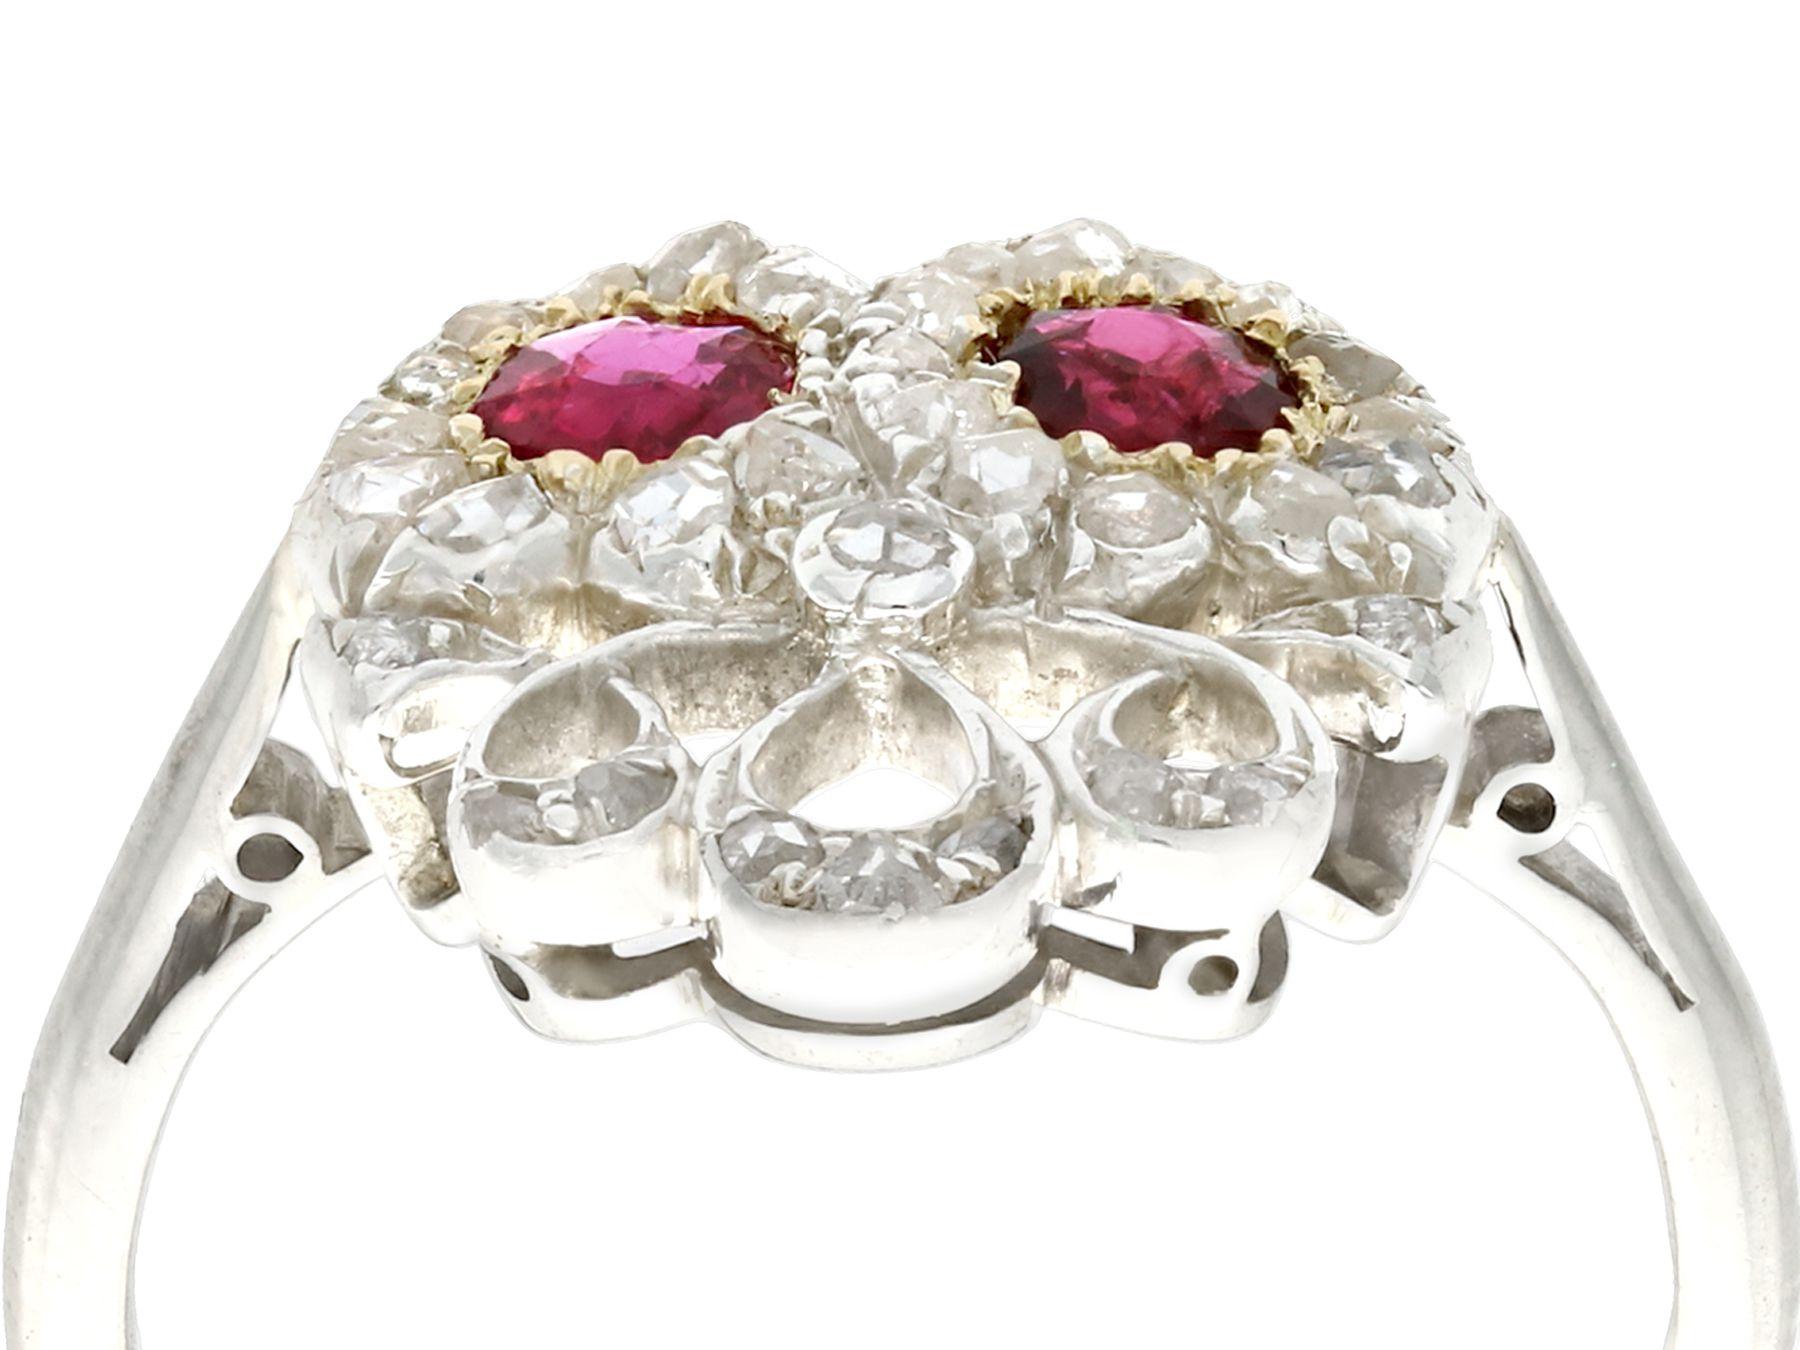 A stunning, fine and impressive antique 0.60 carat diamond and 0.60Ct natural ruby, 18k white gold heart shaped ring; part of our antique jewelry collections

This stunning Victorian heart shaped ruby and diamond dress ring has been crafted in 18k